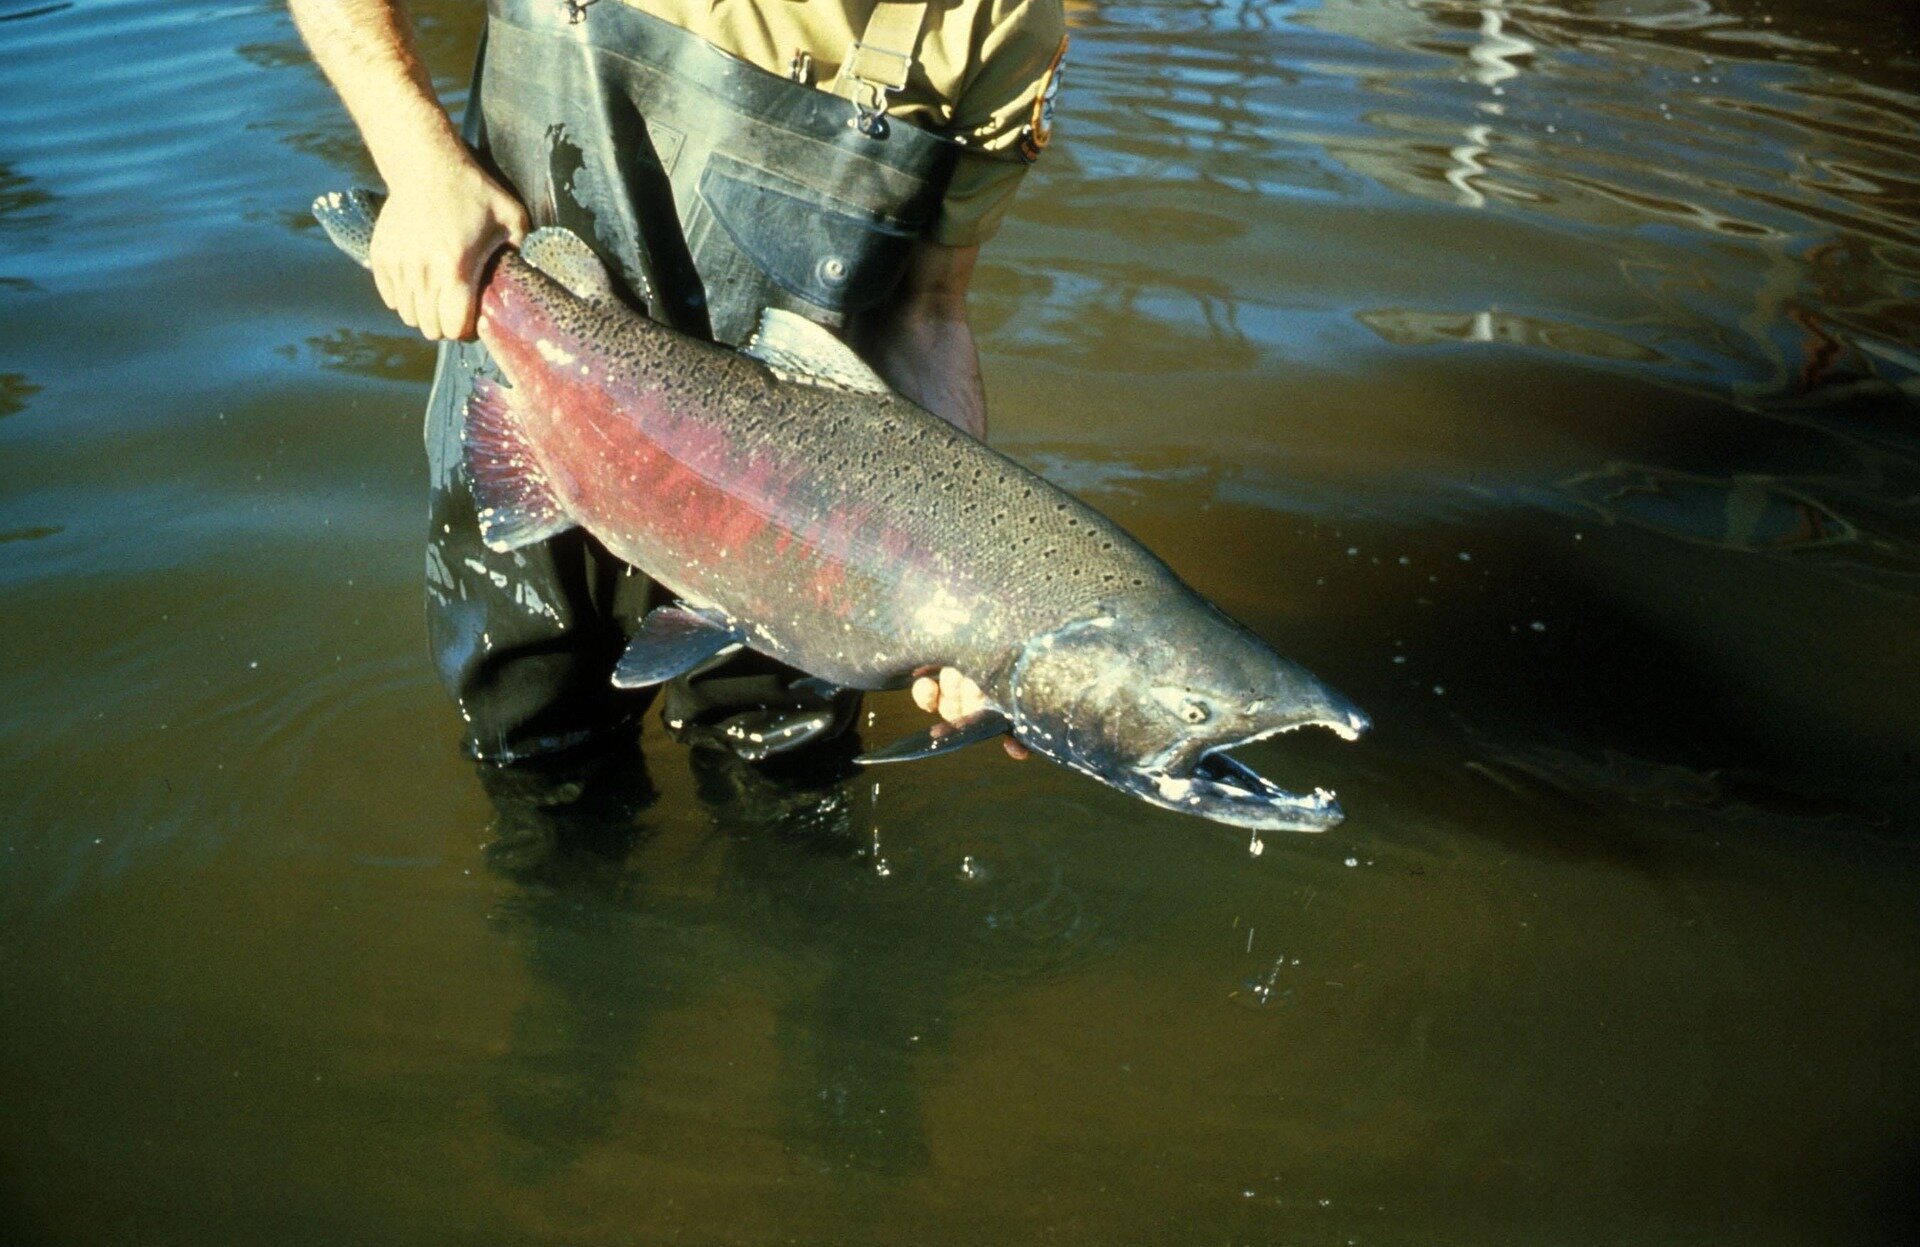 Salmon populations are struggling, bringing economic woes for